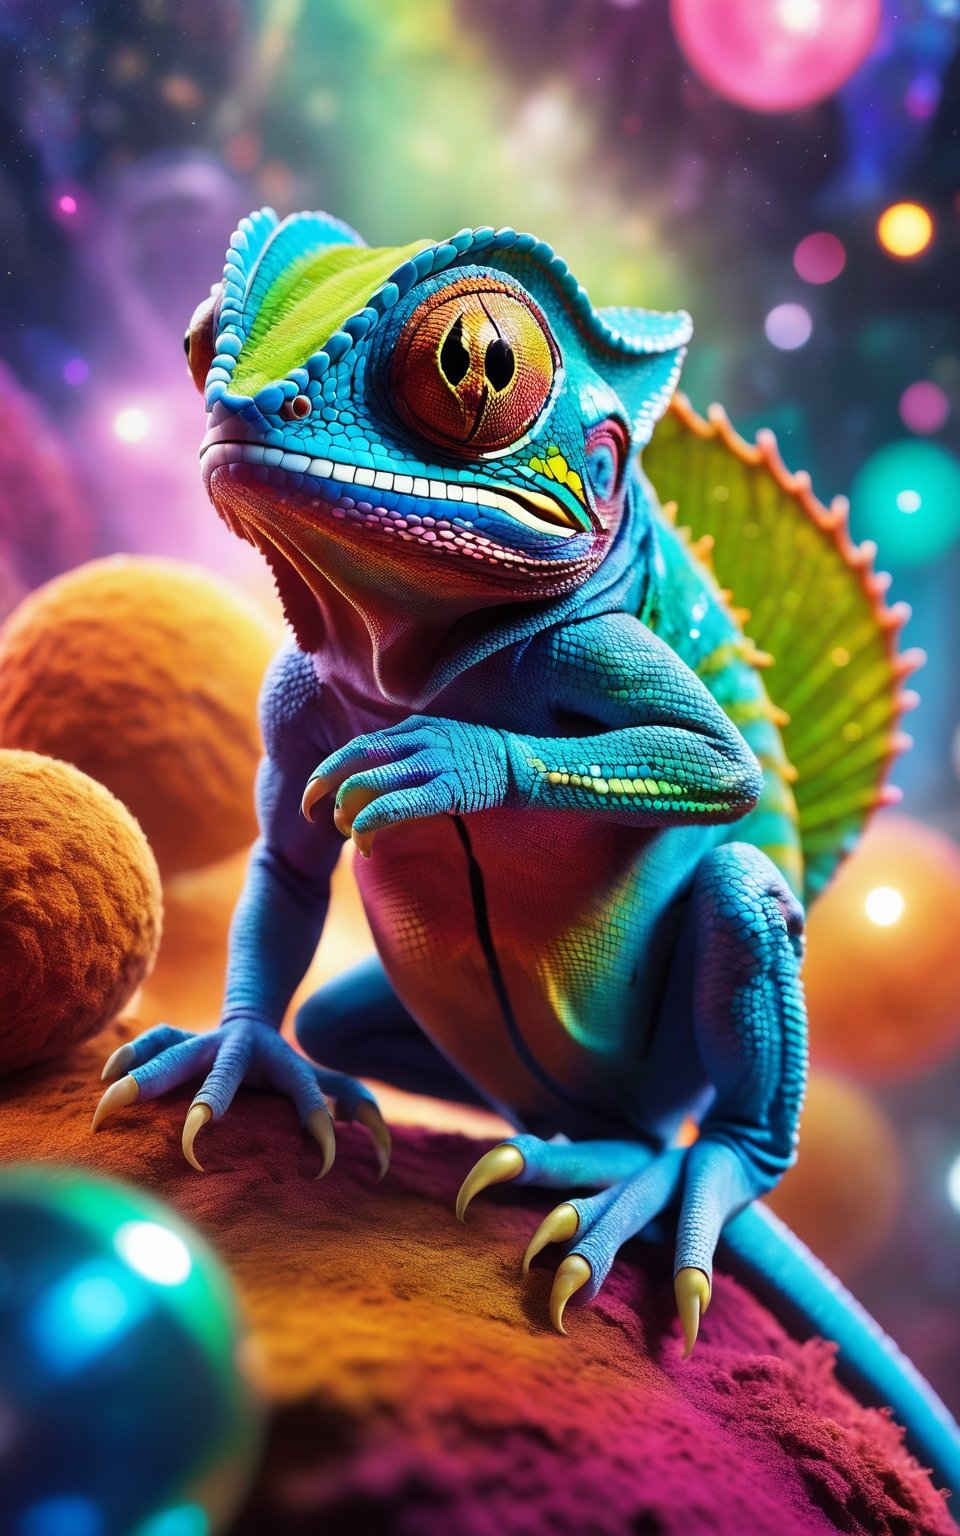 (best quality,8K,highres,masterpiece), ultra-detailed, (cute intergalactic chameleon with multicolored skin in a space disco), a charming intergalactic chameleon with vibrant, multicolored skin, adding to its whimsical charm. The creature is situated in a space disco constructed from comfy flow connections and nodes, creating a unique and futuristic environment. Every detail of the scene is highly detailed, from the intricate patterns on the chameleon's skin to the translucent quality of its appearance. The atmosphere is lively and dynamic, with pulsating lights and energetic music filling the space disco. This artwork captures the playful and otherworldly nature of the intergalactic chameleon as it explores its cosmic surroundings. Feel free to add your own creative touches to enhance the vibrancy and liveliness of this captivating scene.